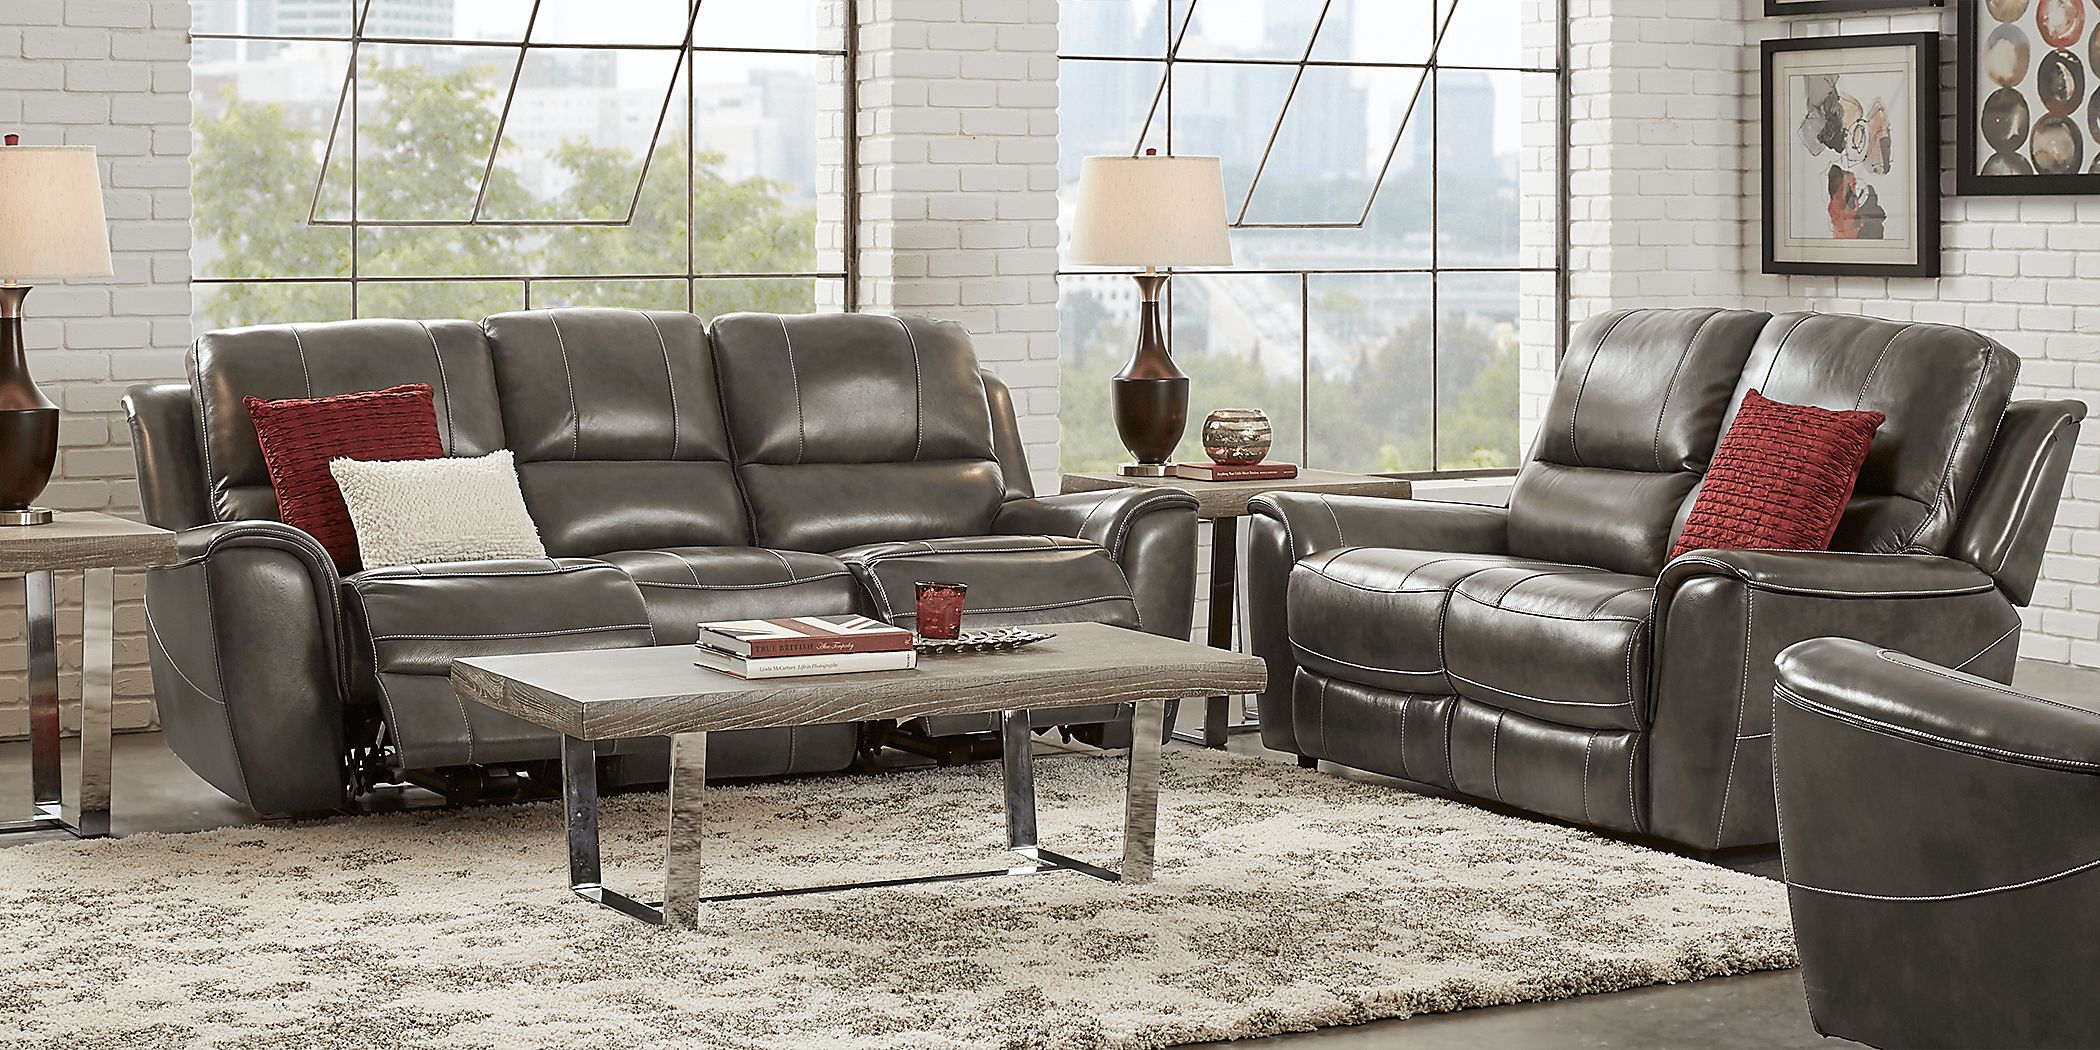 Lanzo Gray Leather 2 Pc Living Room with Reclining Sofa